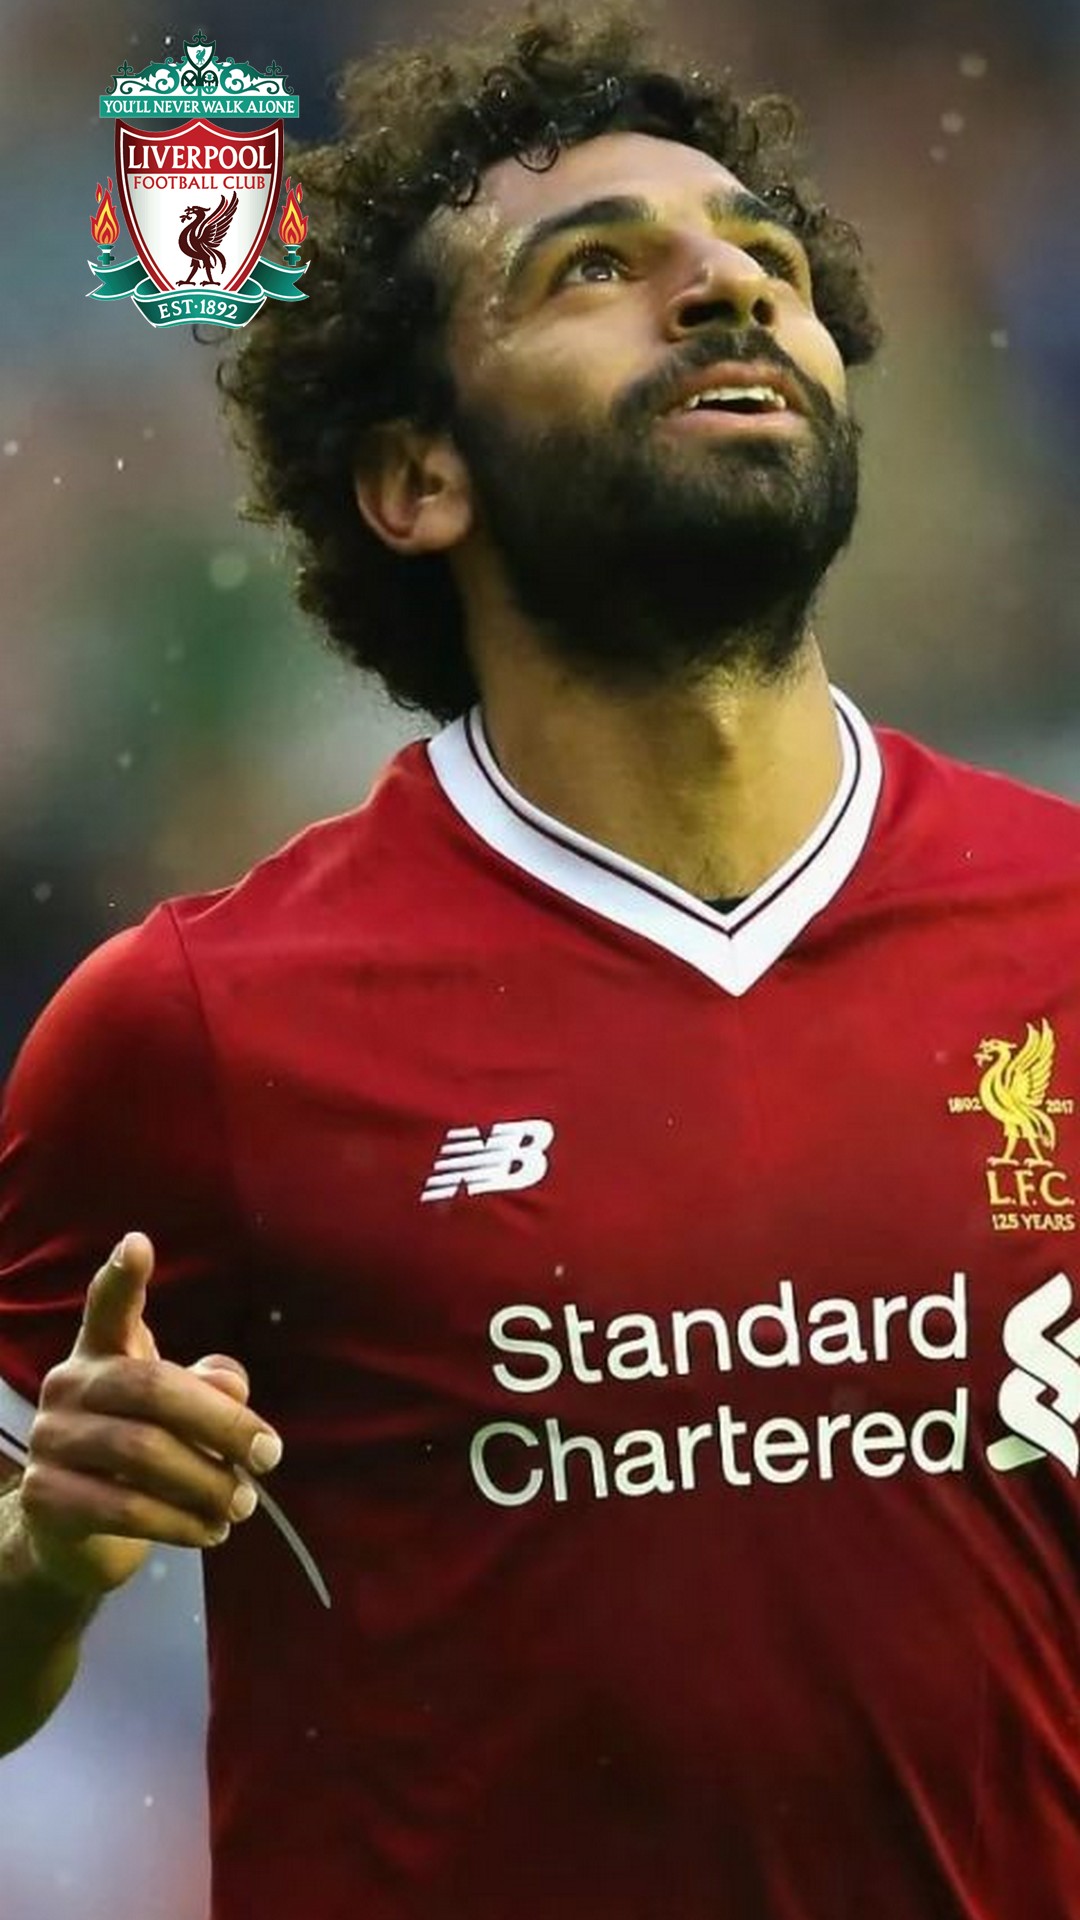 Wallpaper Android Mohamed Salah Liverpool with image resolution 1080x1920 pixel. You can make this wallpaper for your Android backgrounds, Tablet, Smartphones Screensavers and Mobile Phone Lock Screen